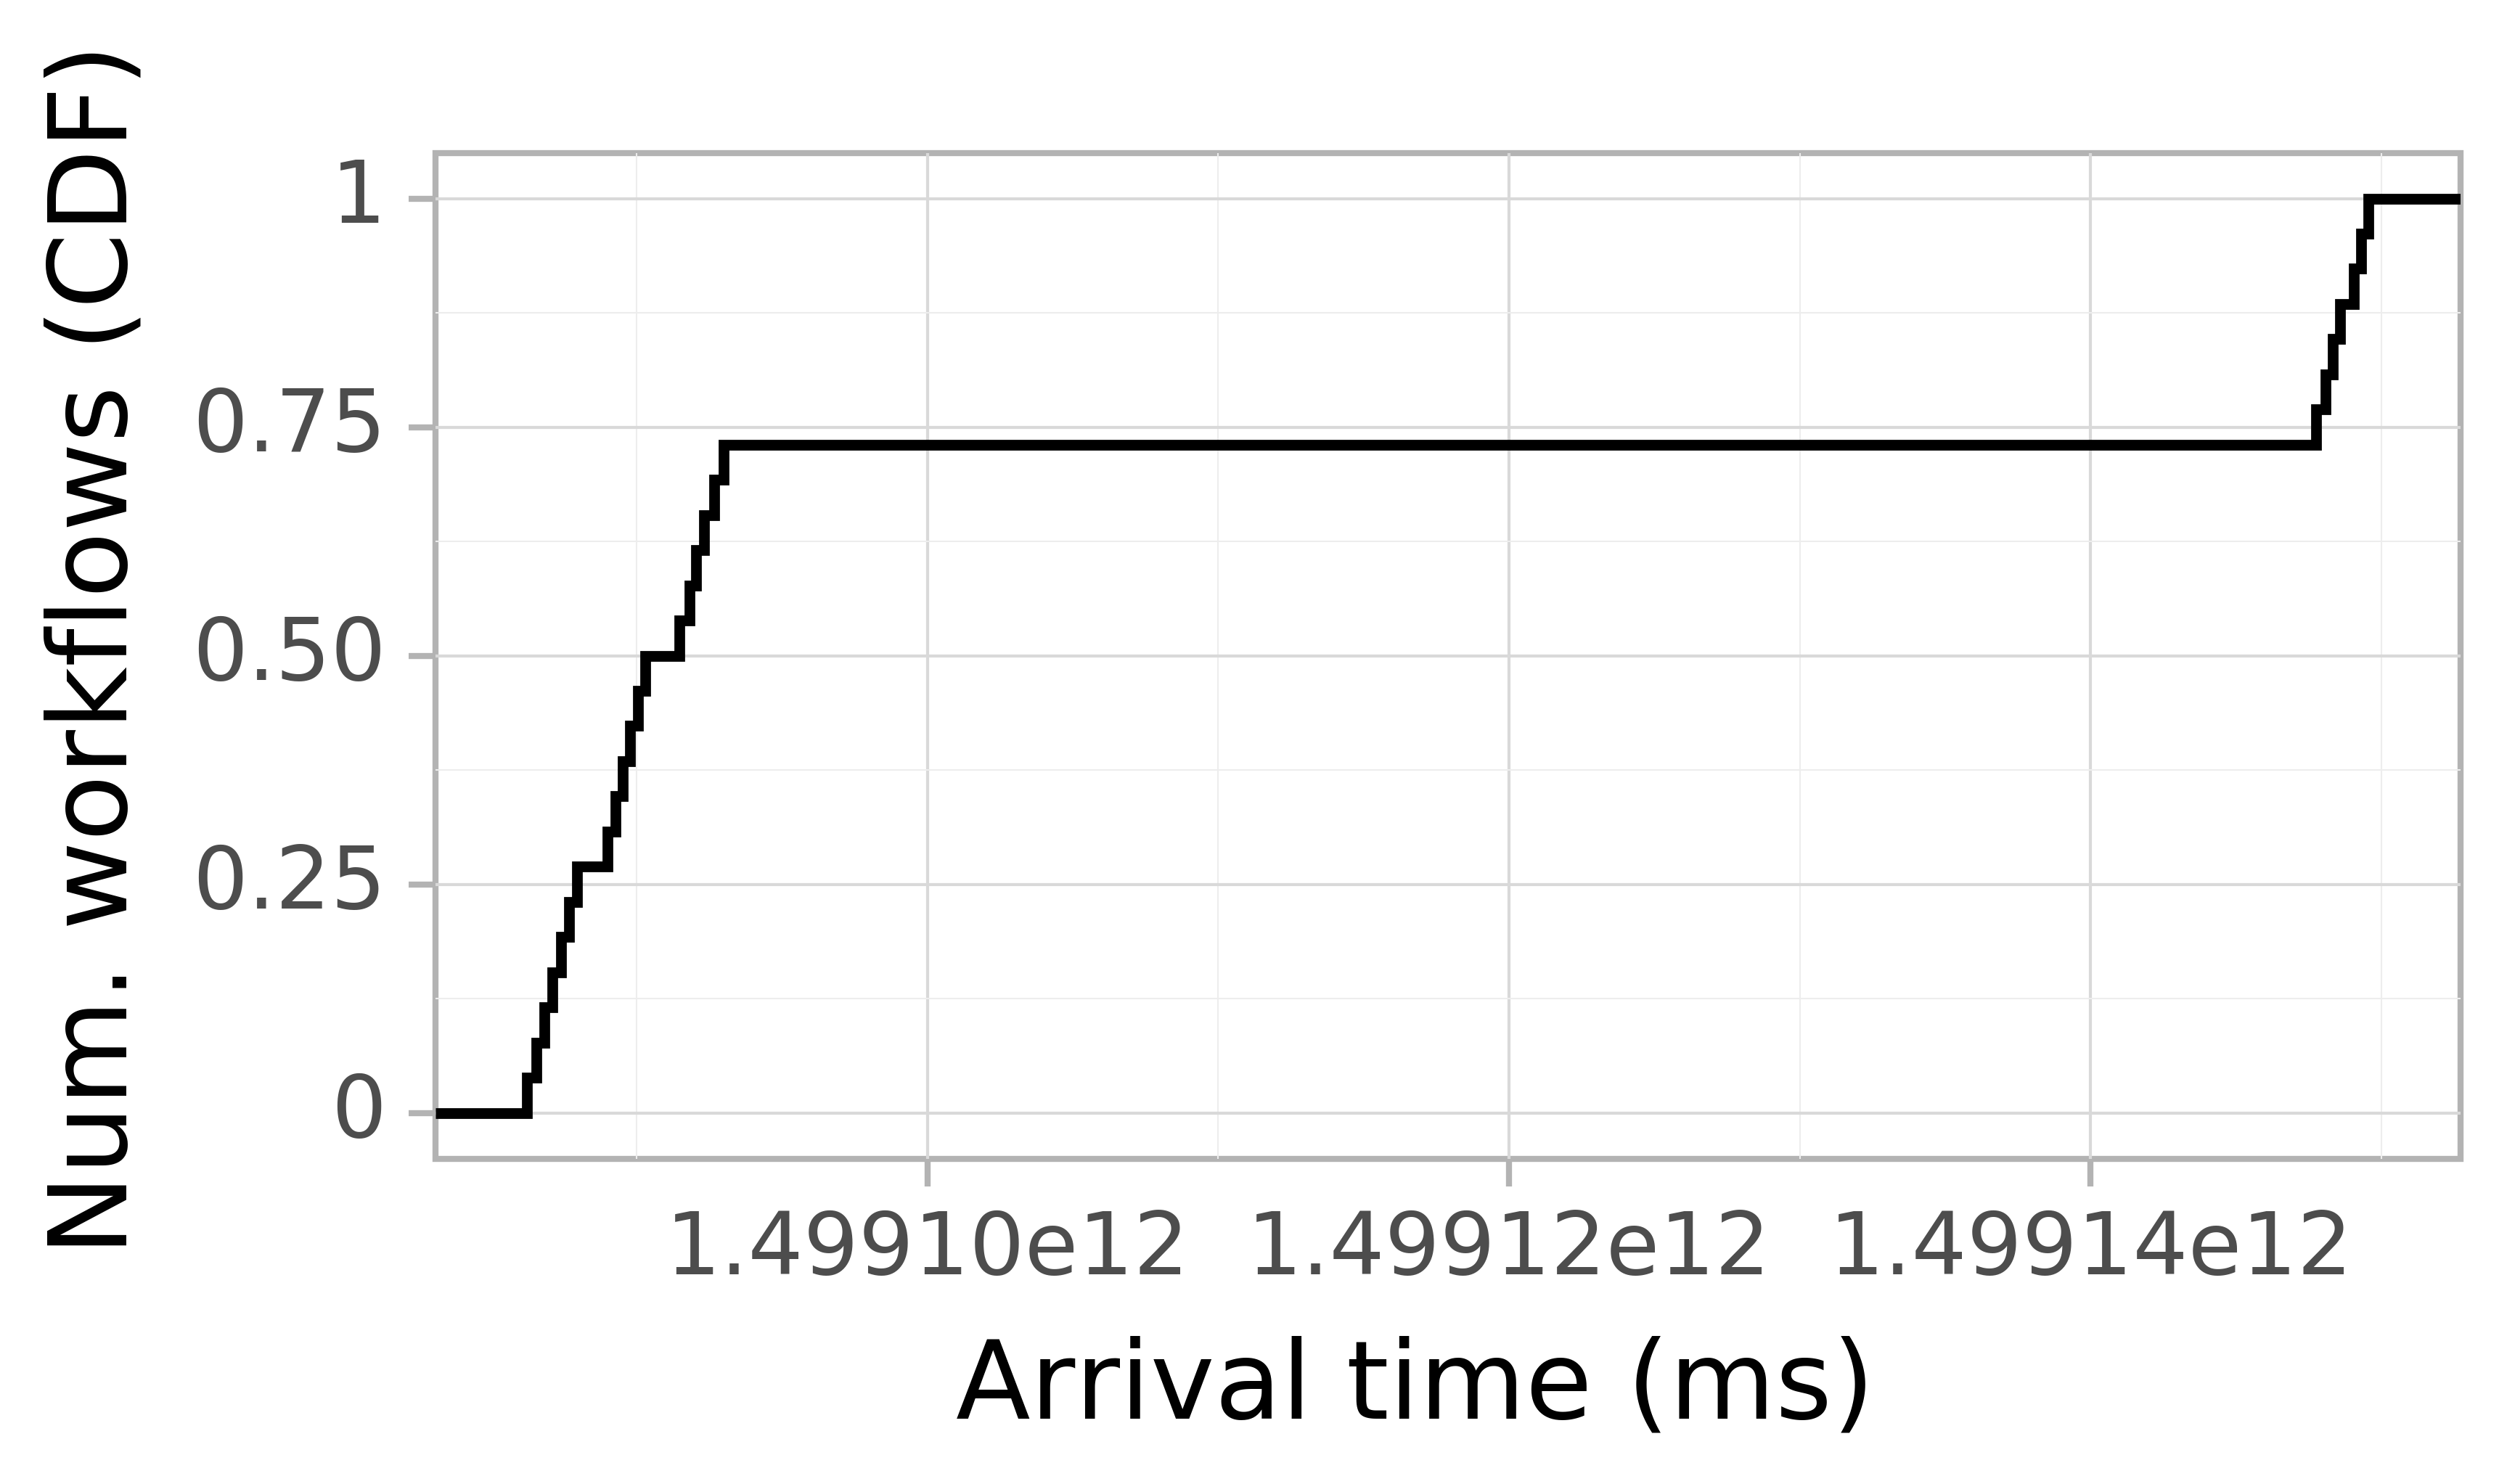 Job arrival CDF graph for the askalon-new_ee35 trace.